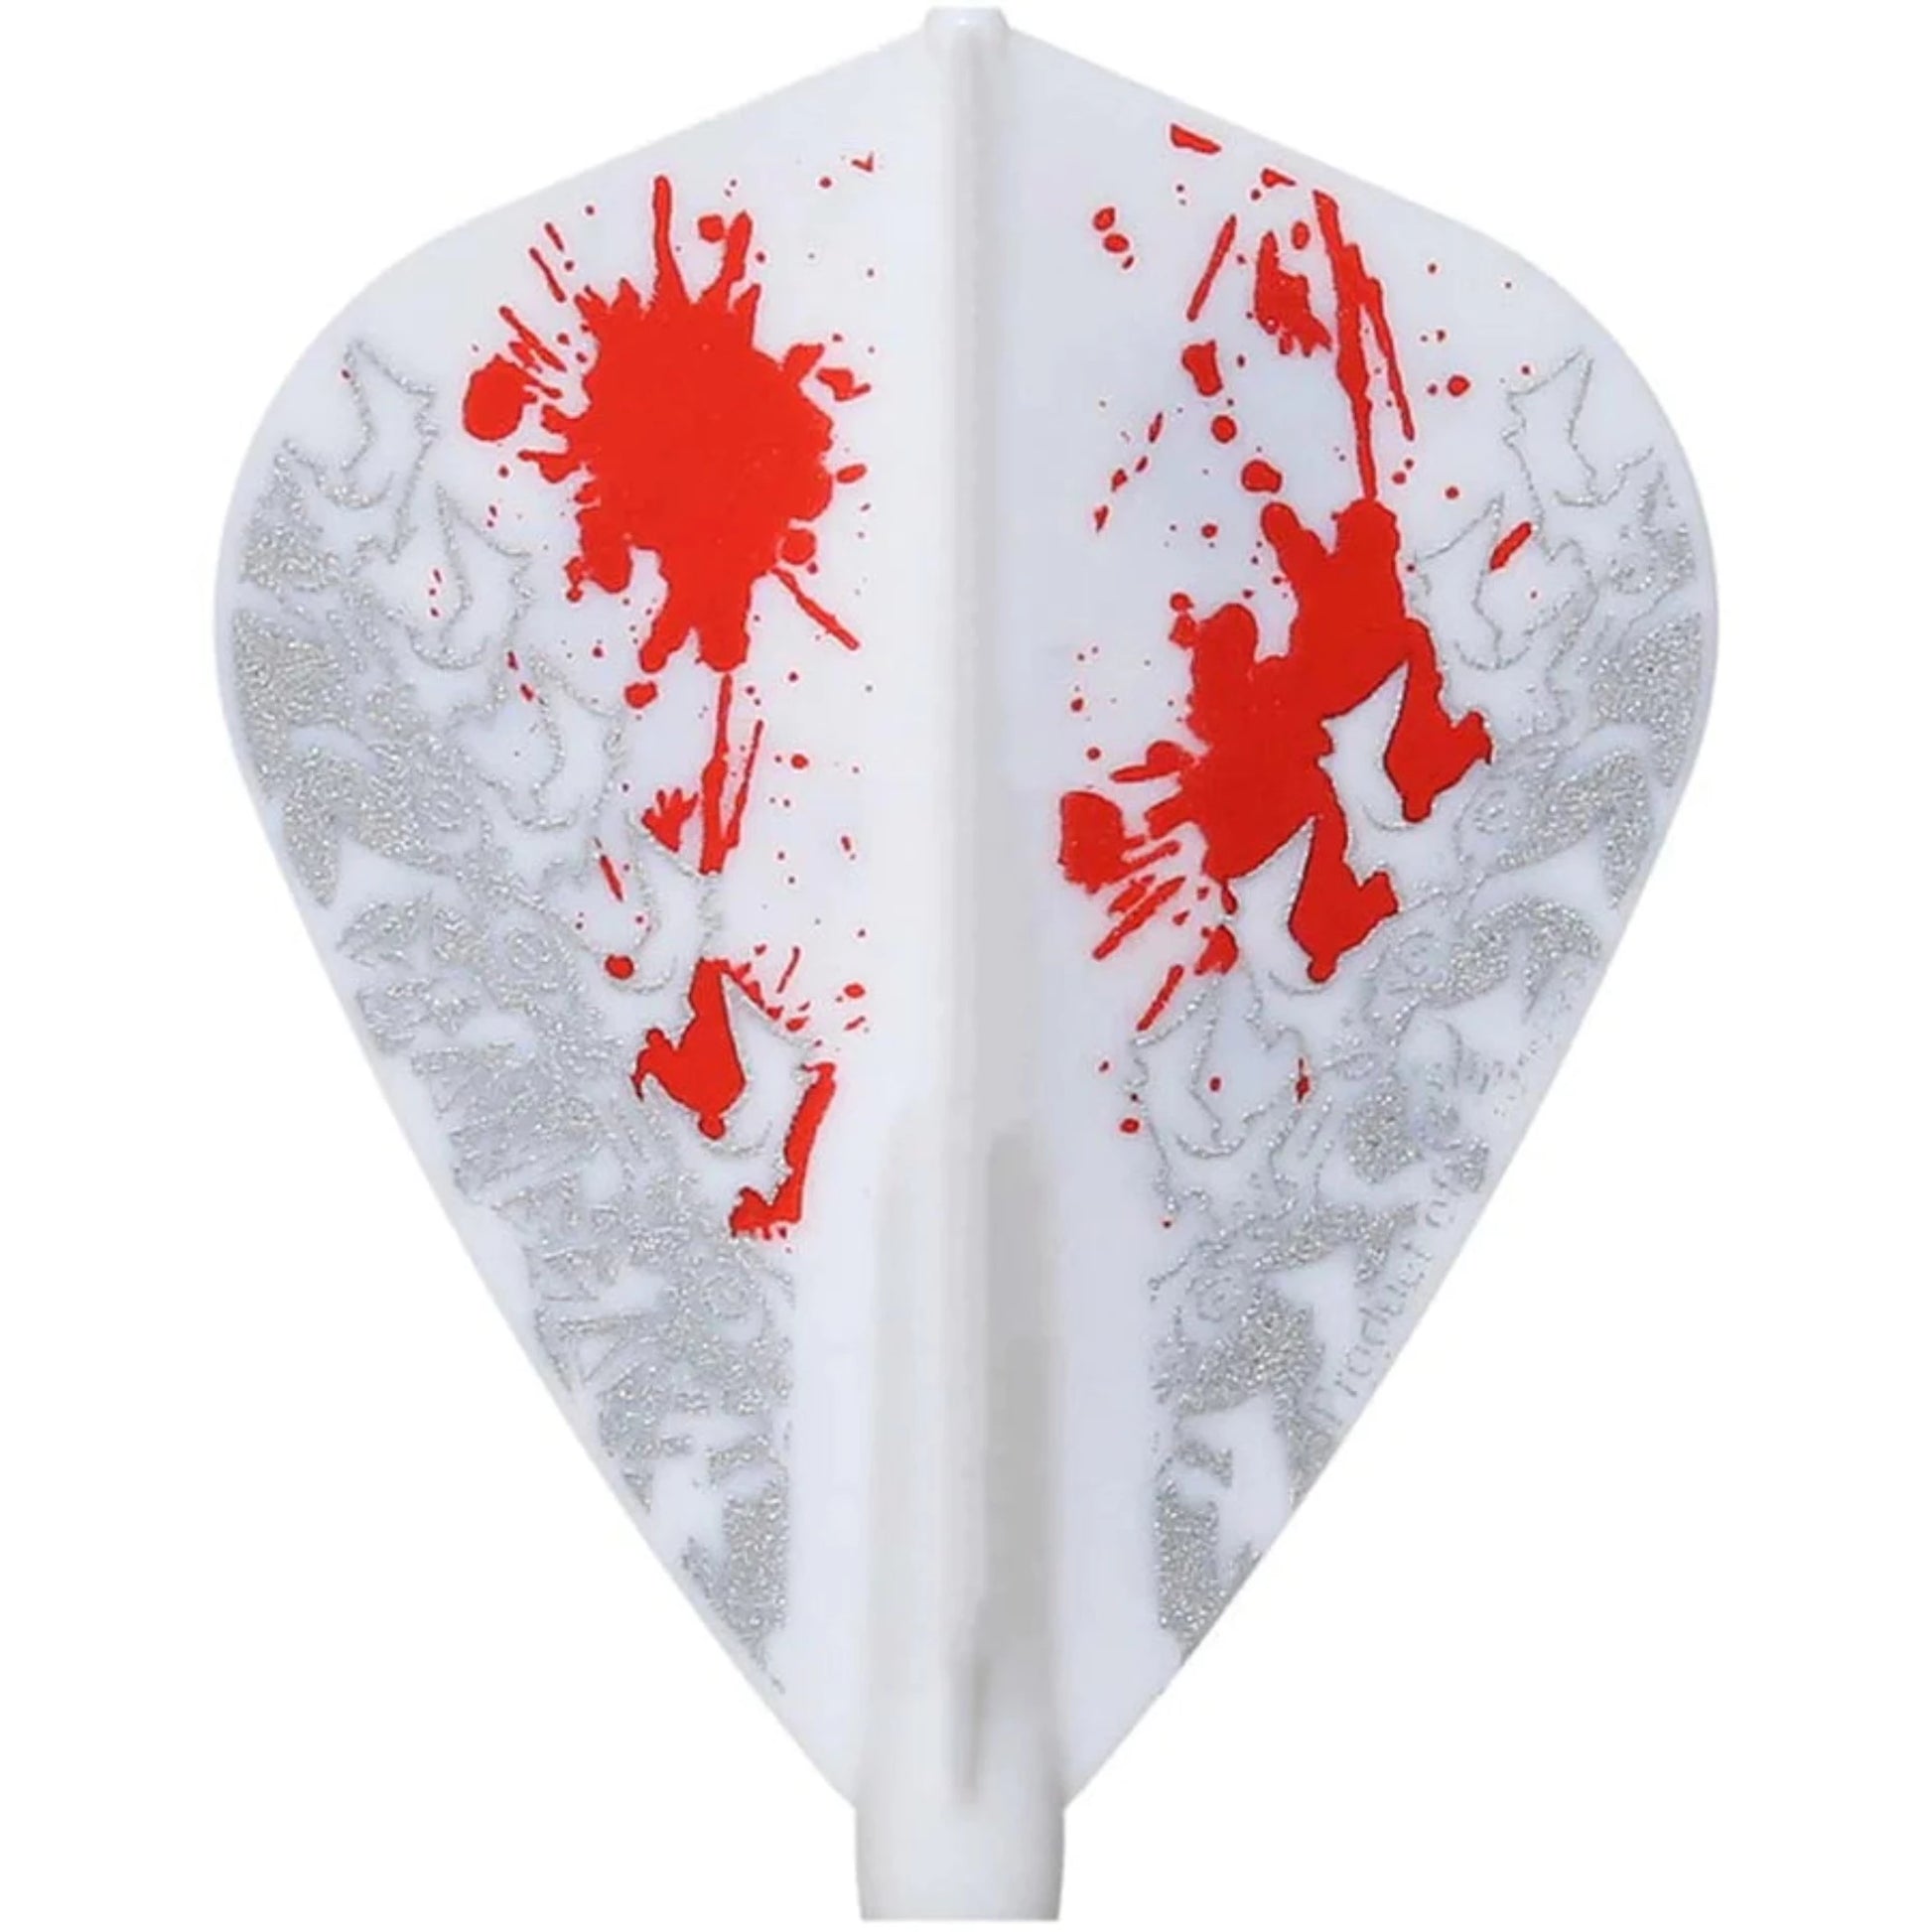 Joseph Chaney Signature Kite-shaped Fit Flights Dart Flights in white with dynamic red splatter, combining style and aerodynamic performance.